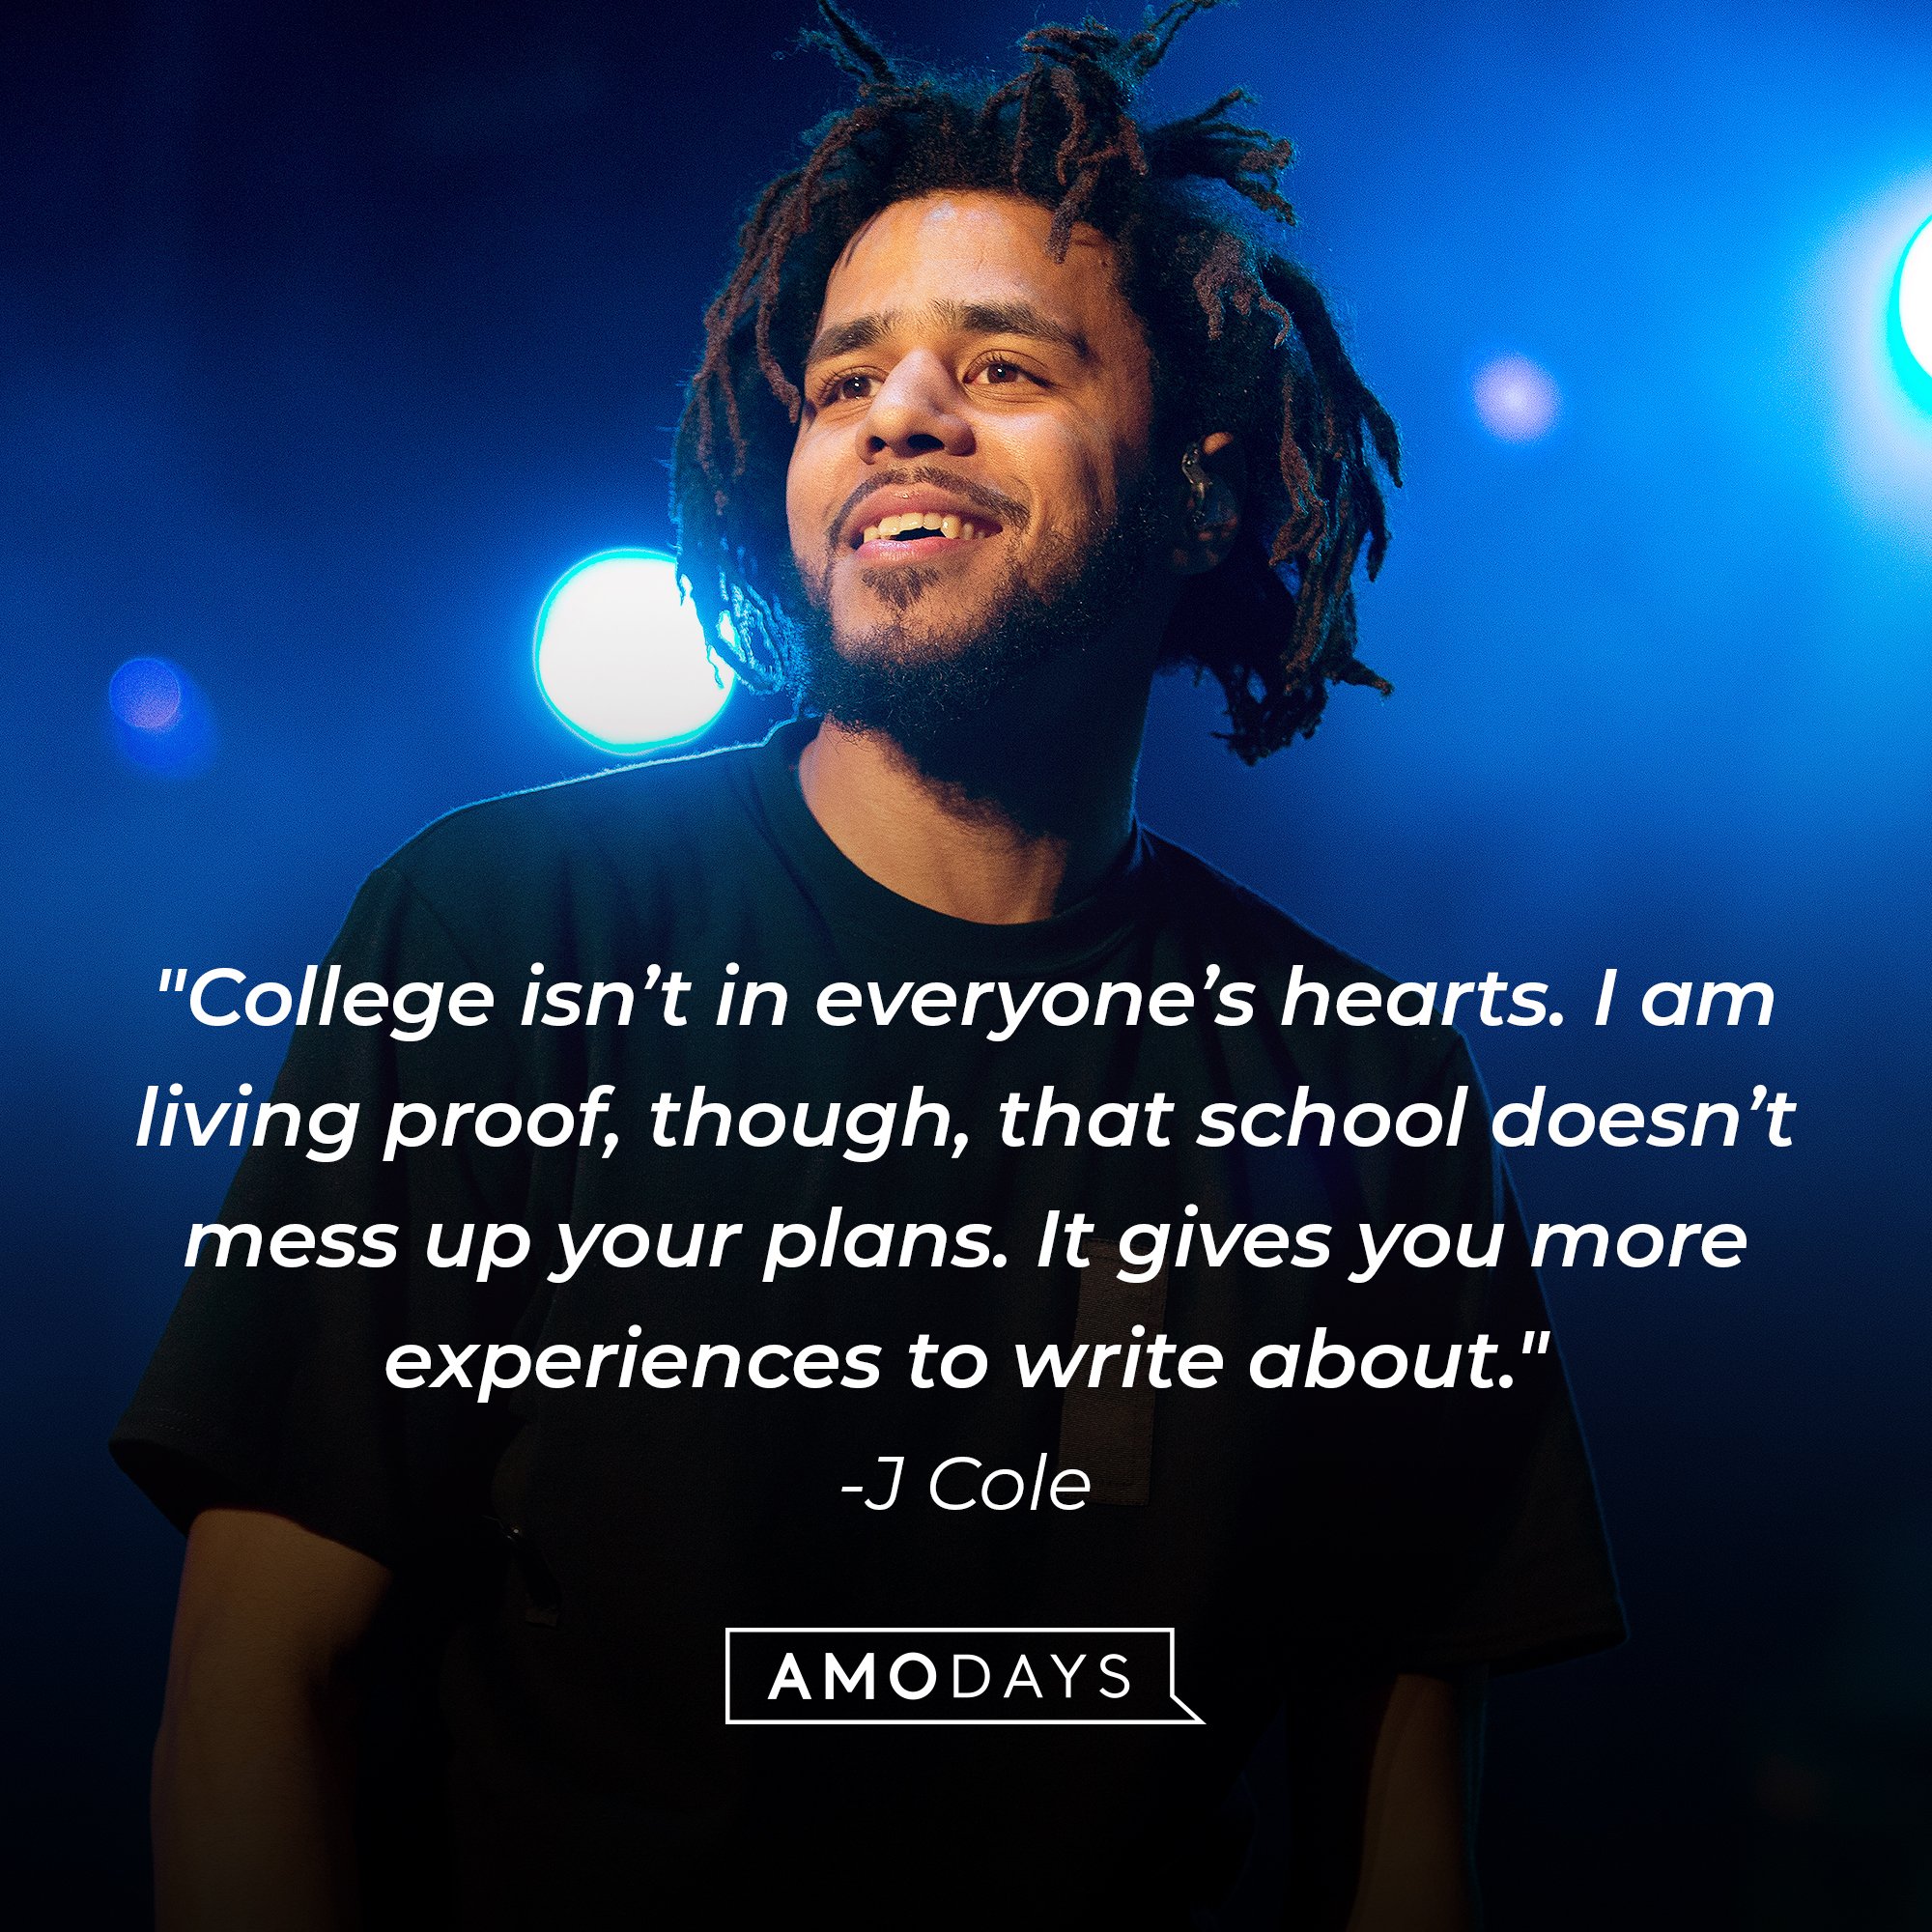 J Cole's quote: "College isn’t in everyone’s hearts. I am living proof, though, that school doesn’t mess up your plans. It gives you more experiences to write about." | Image: AmoDays